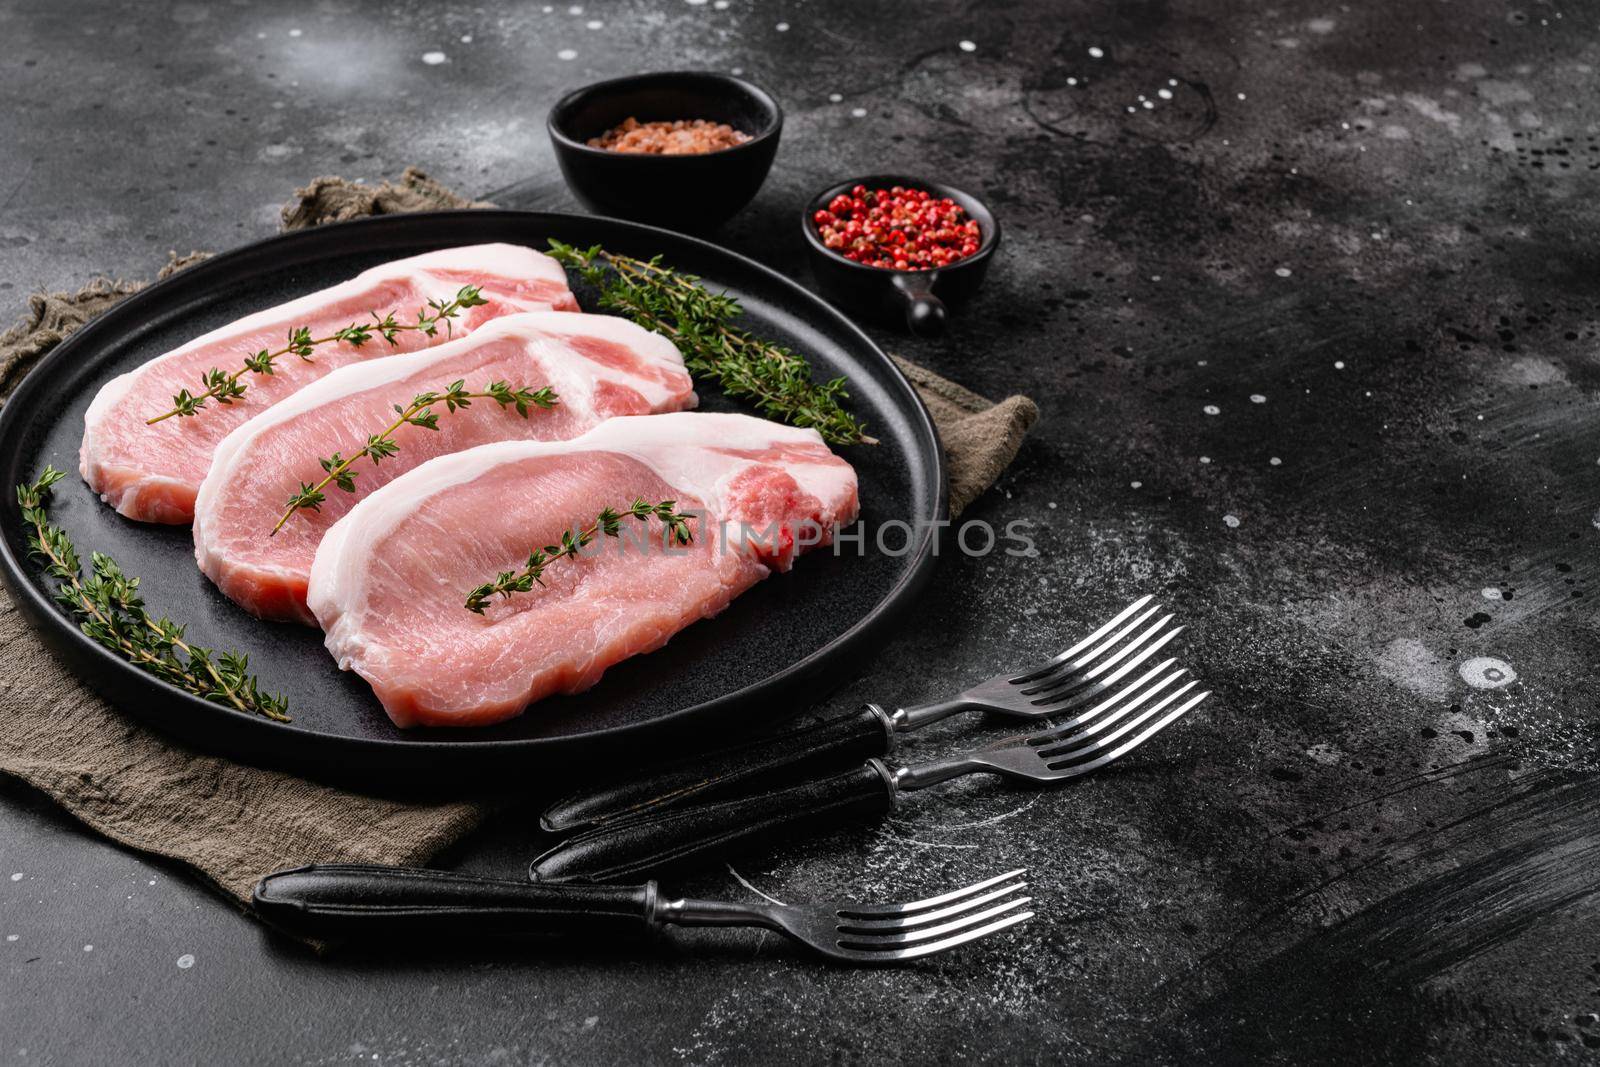 Raw pork steak ready for cooking with herbs set, on black dark stone table background, with copy space for text